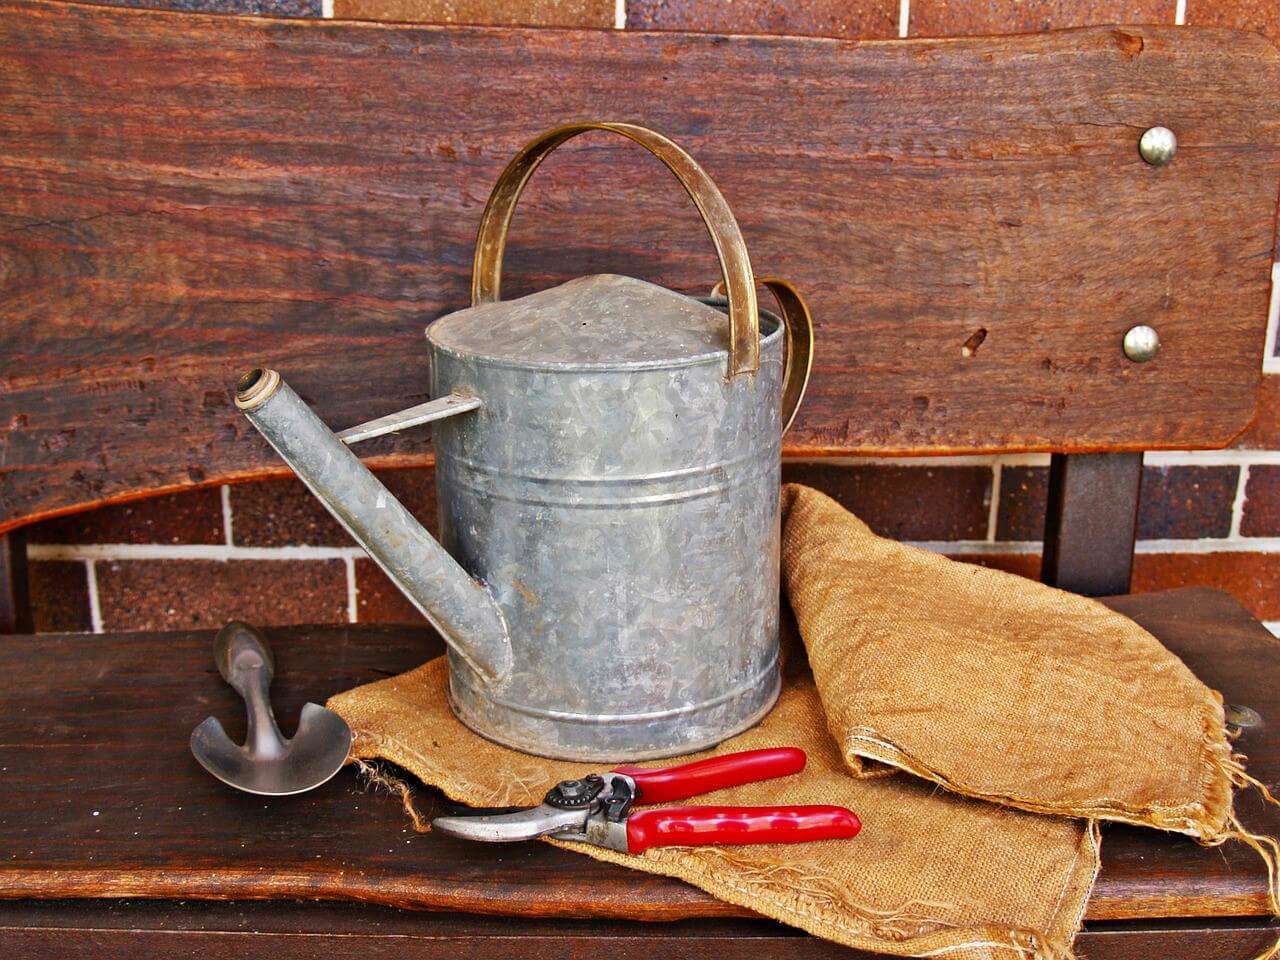 a watering can and red garden sheers and a garden trowel laid out on a wooden table against a brick wall